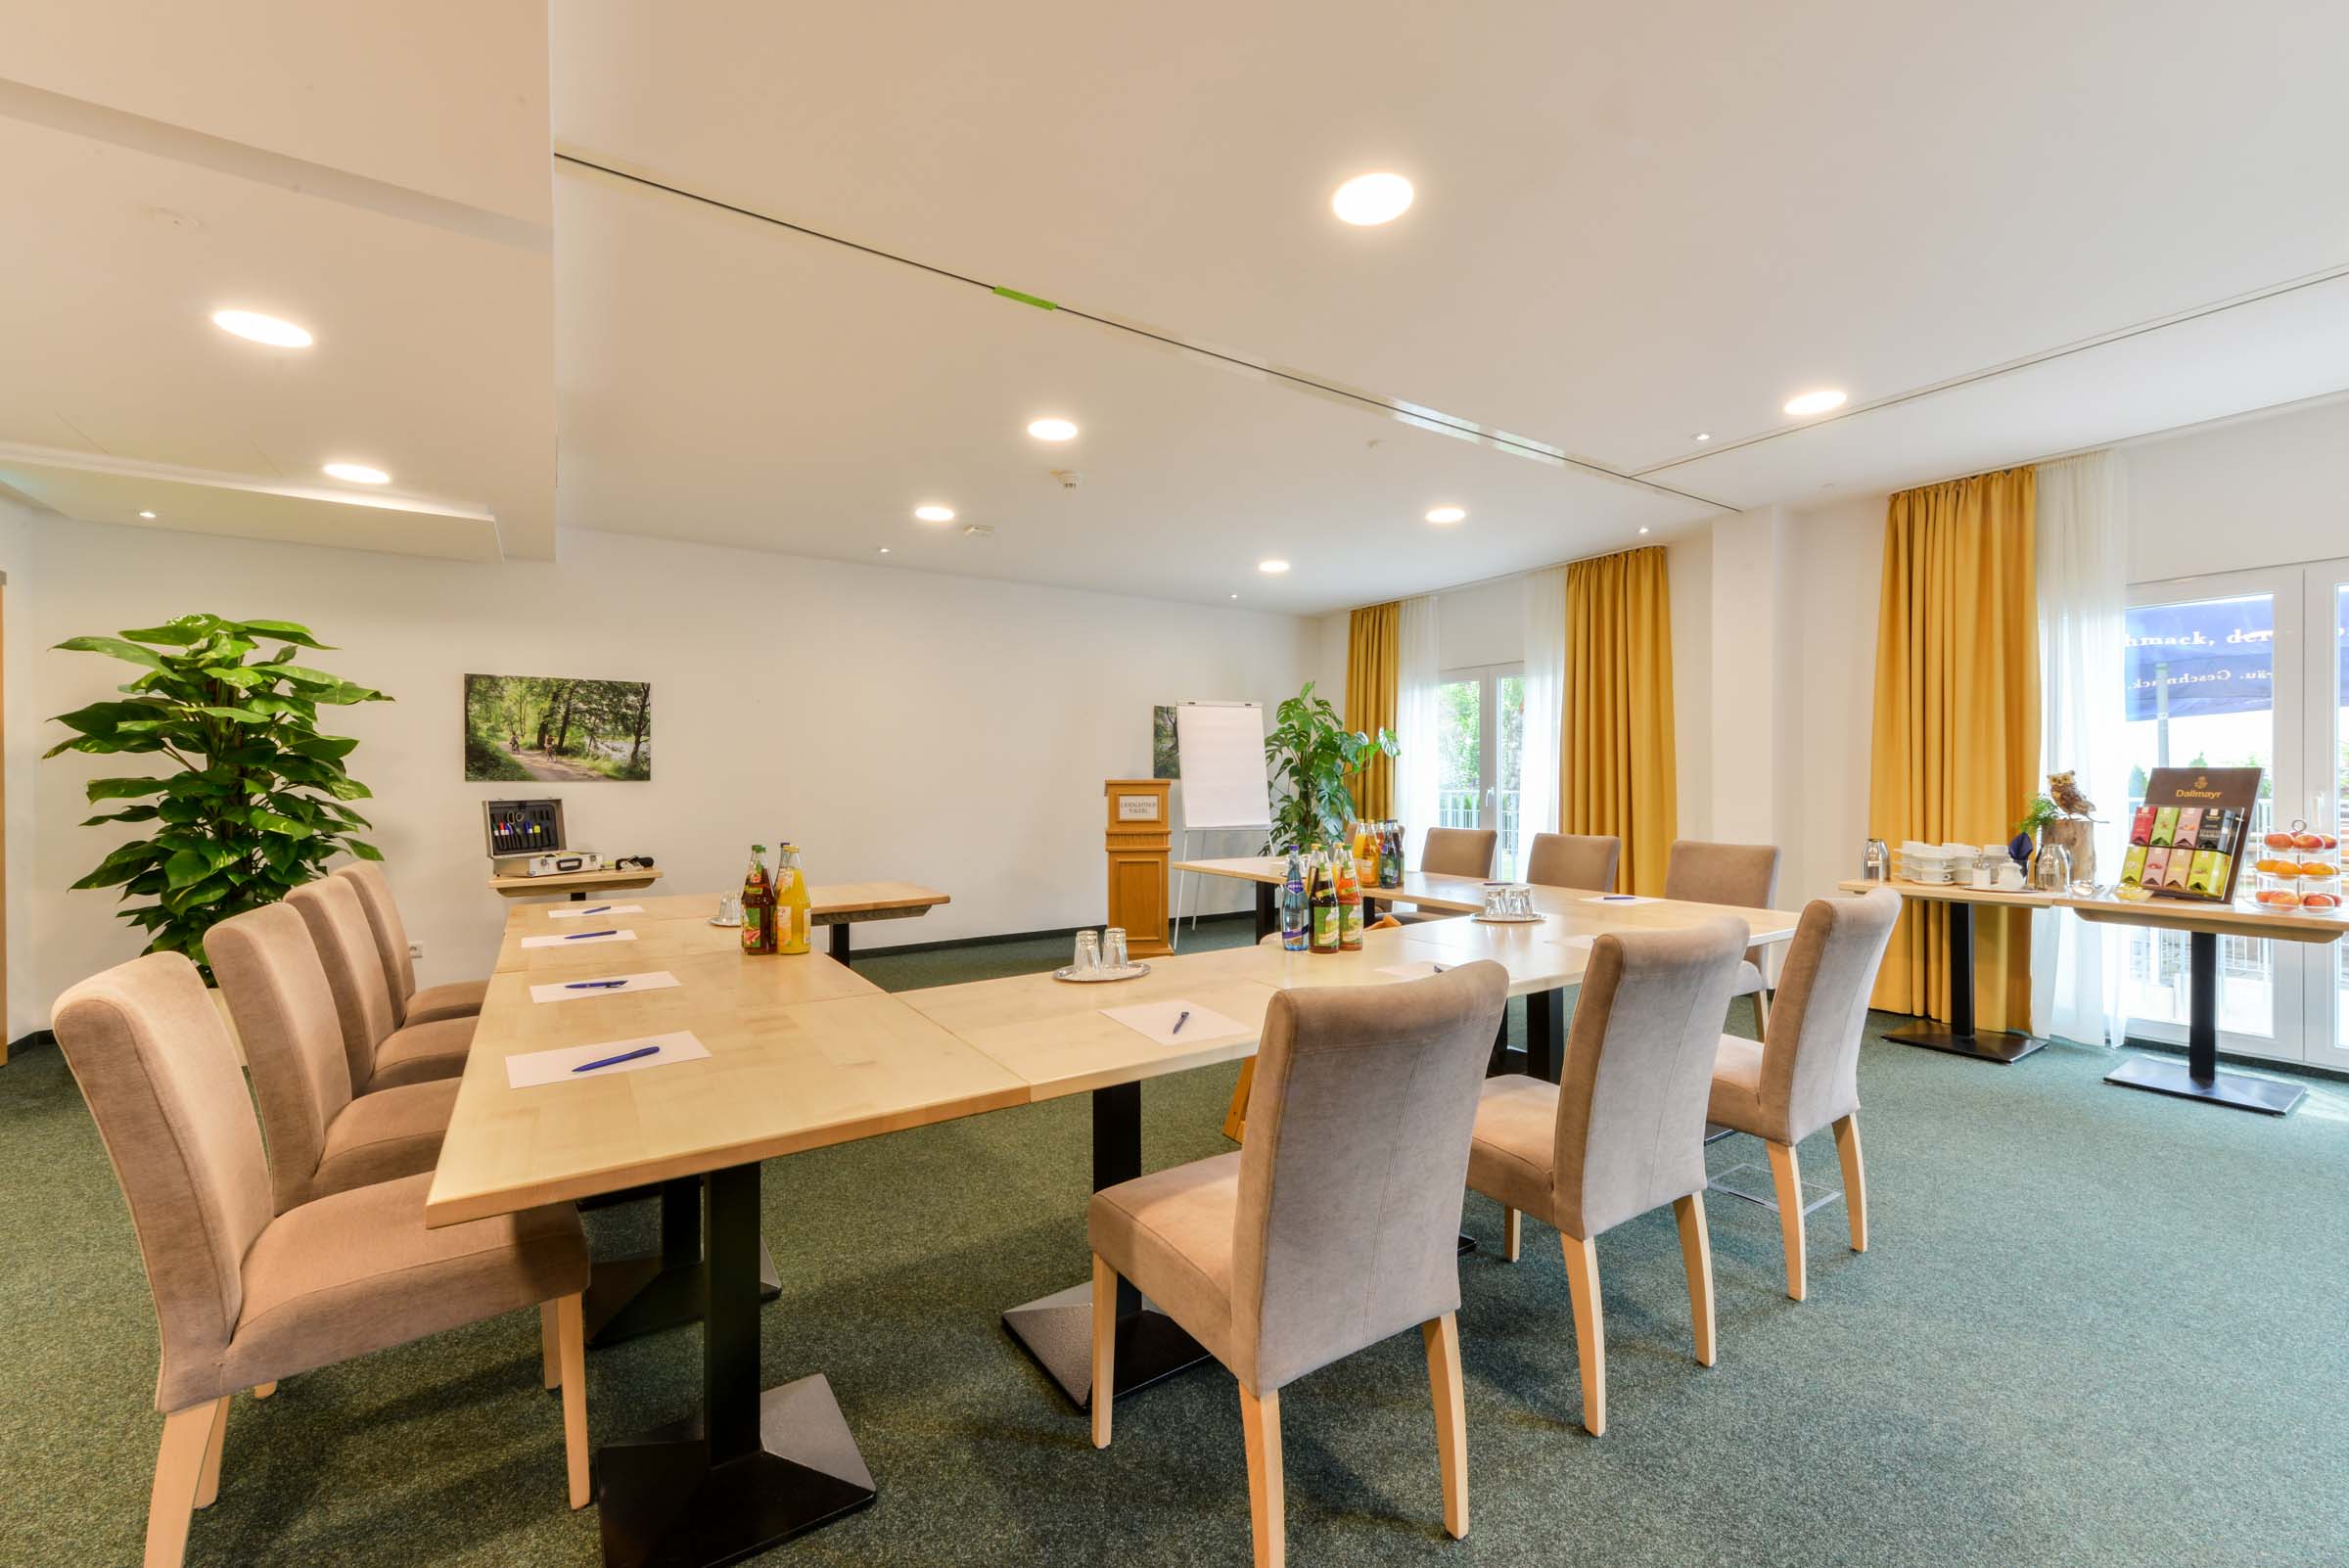 Conference room and board at Munich Airport